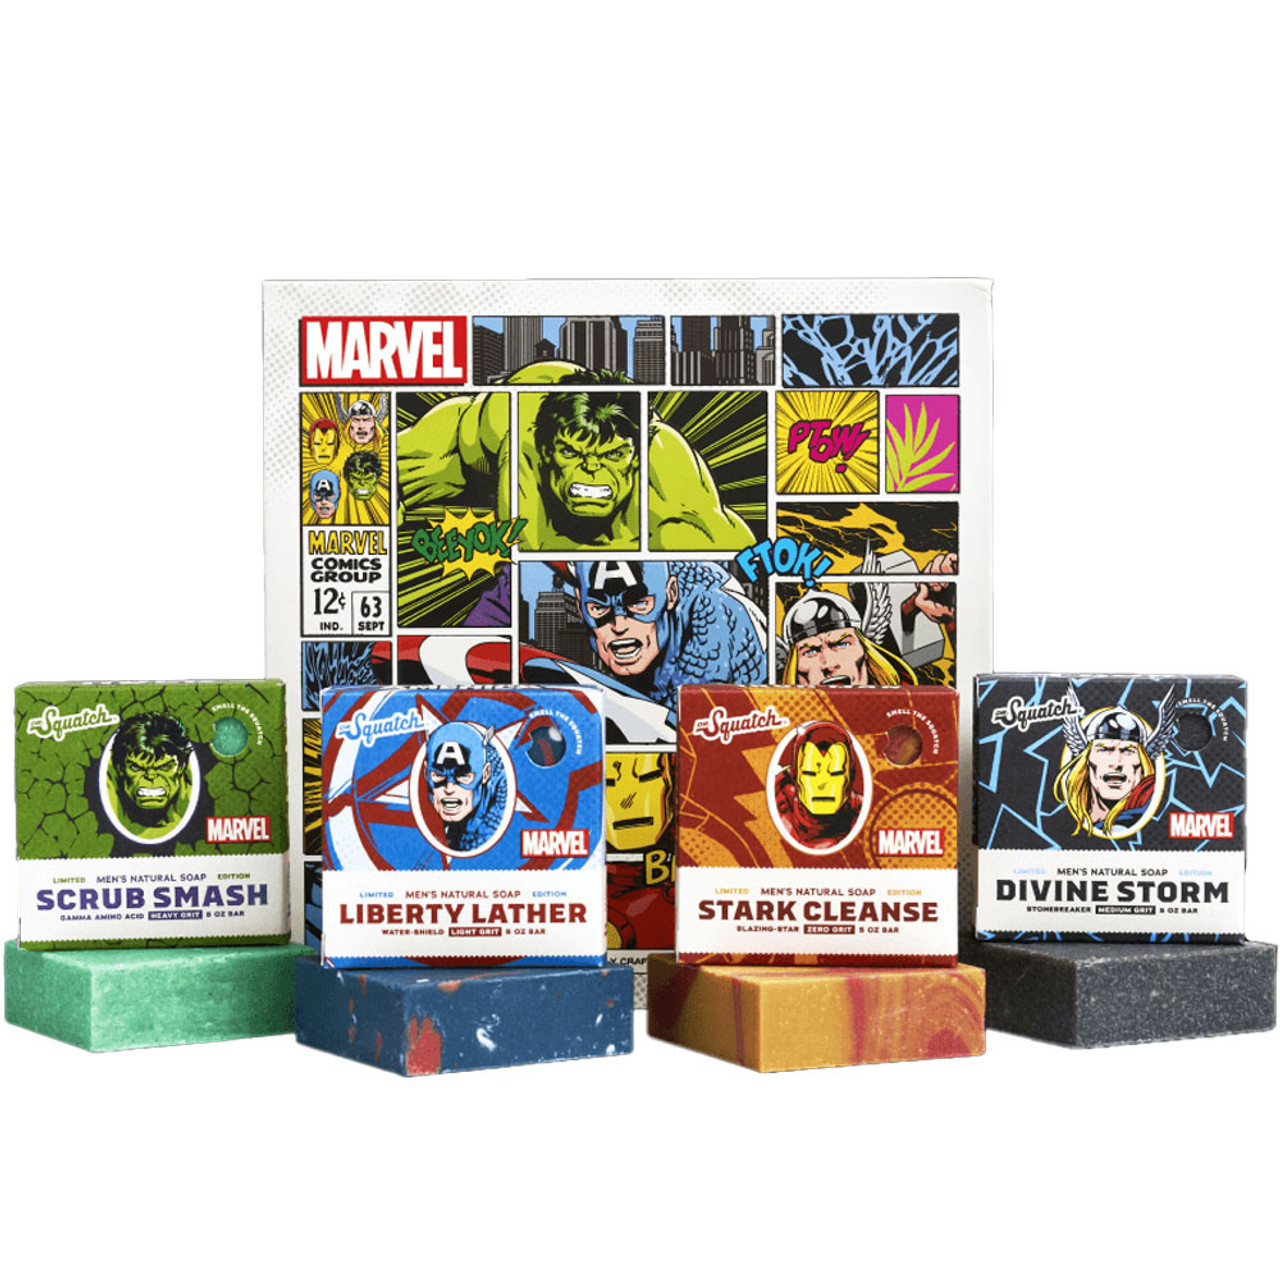 https://cdn11.bigcommerce.com/s-zut1msomd6/images/stencil/1280x1280/products/39612/239644/Dr-squatch-soaps-avengers-collection-box-kit-avg-01-avengers-collection-main__11079.1695999557.jpg?c=1